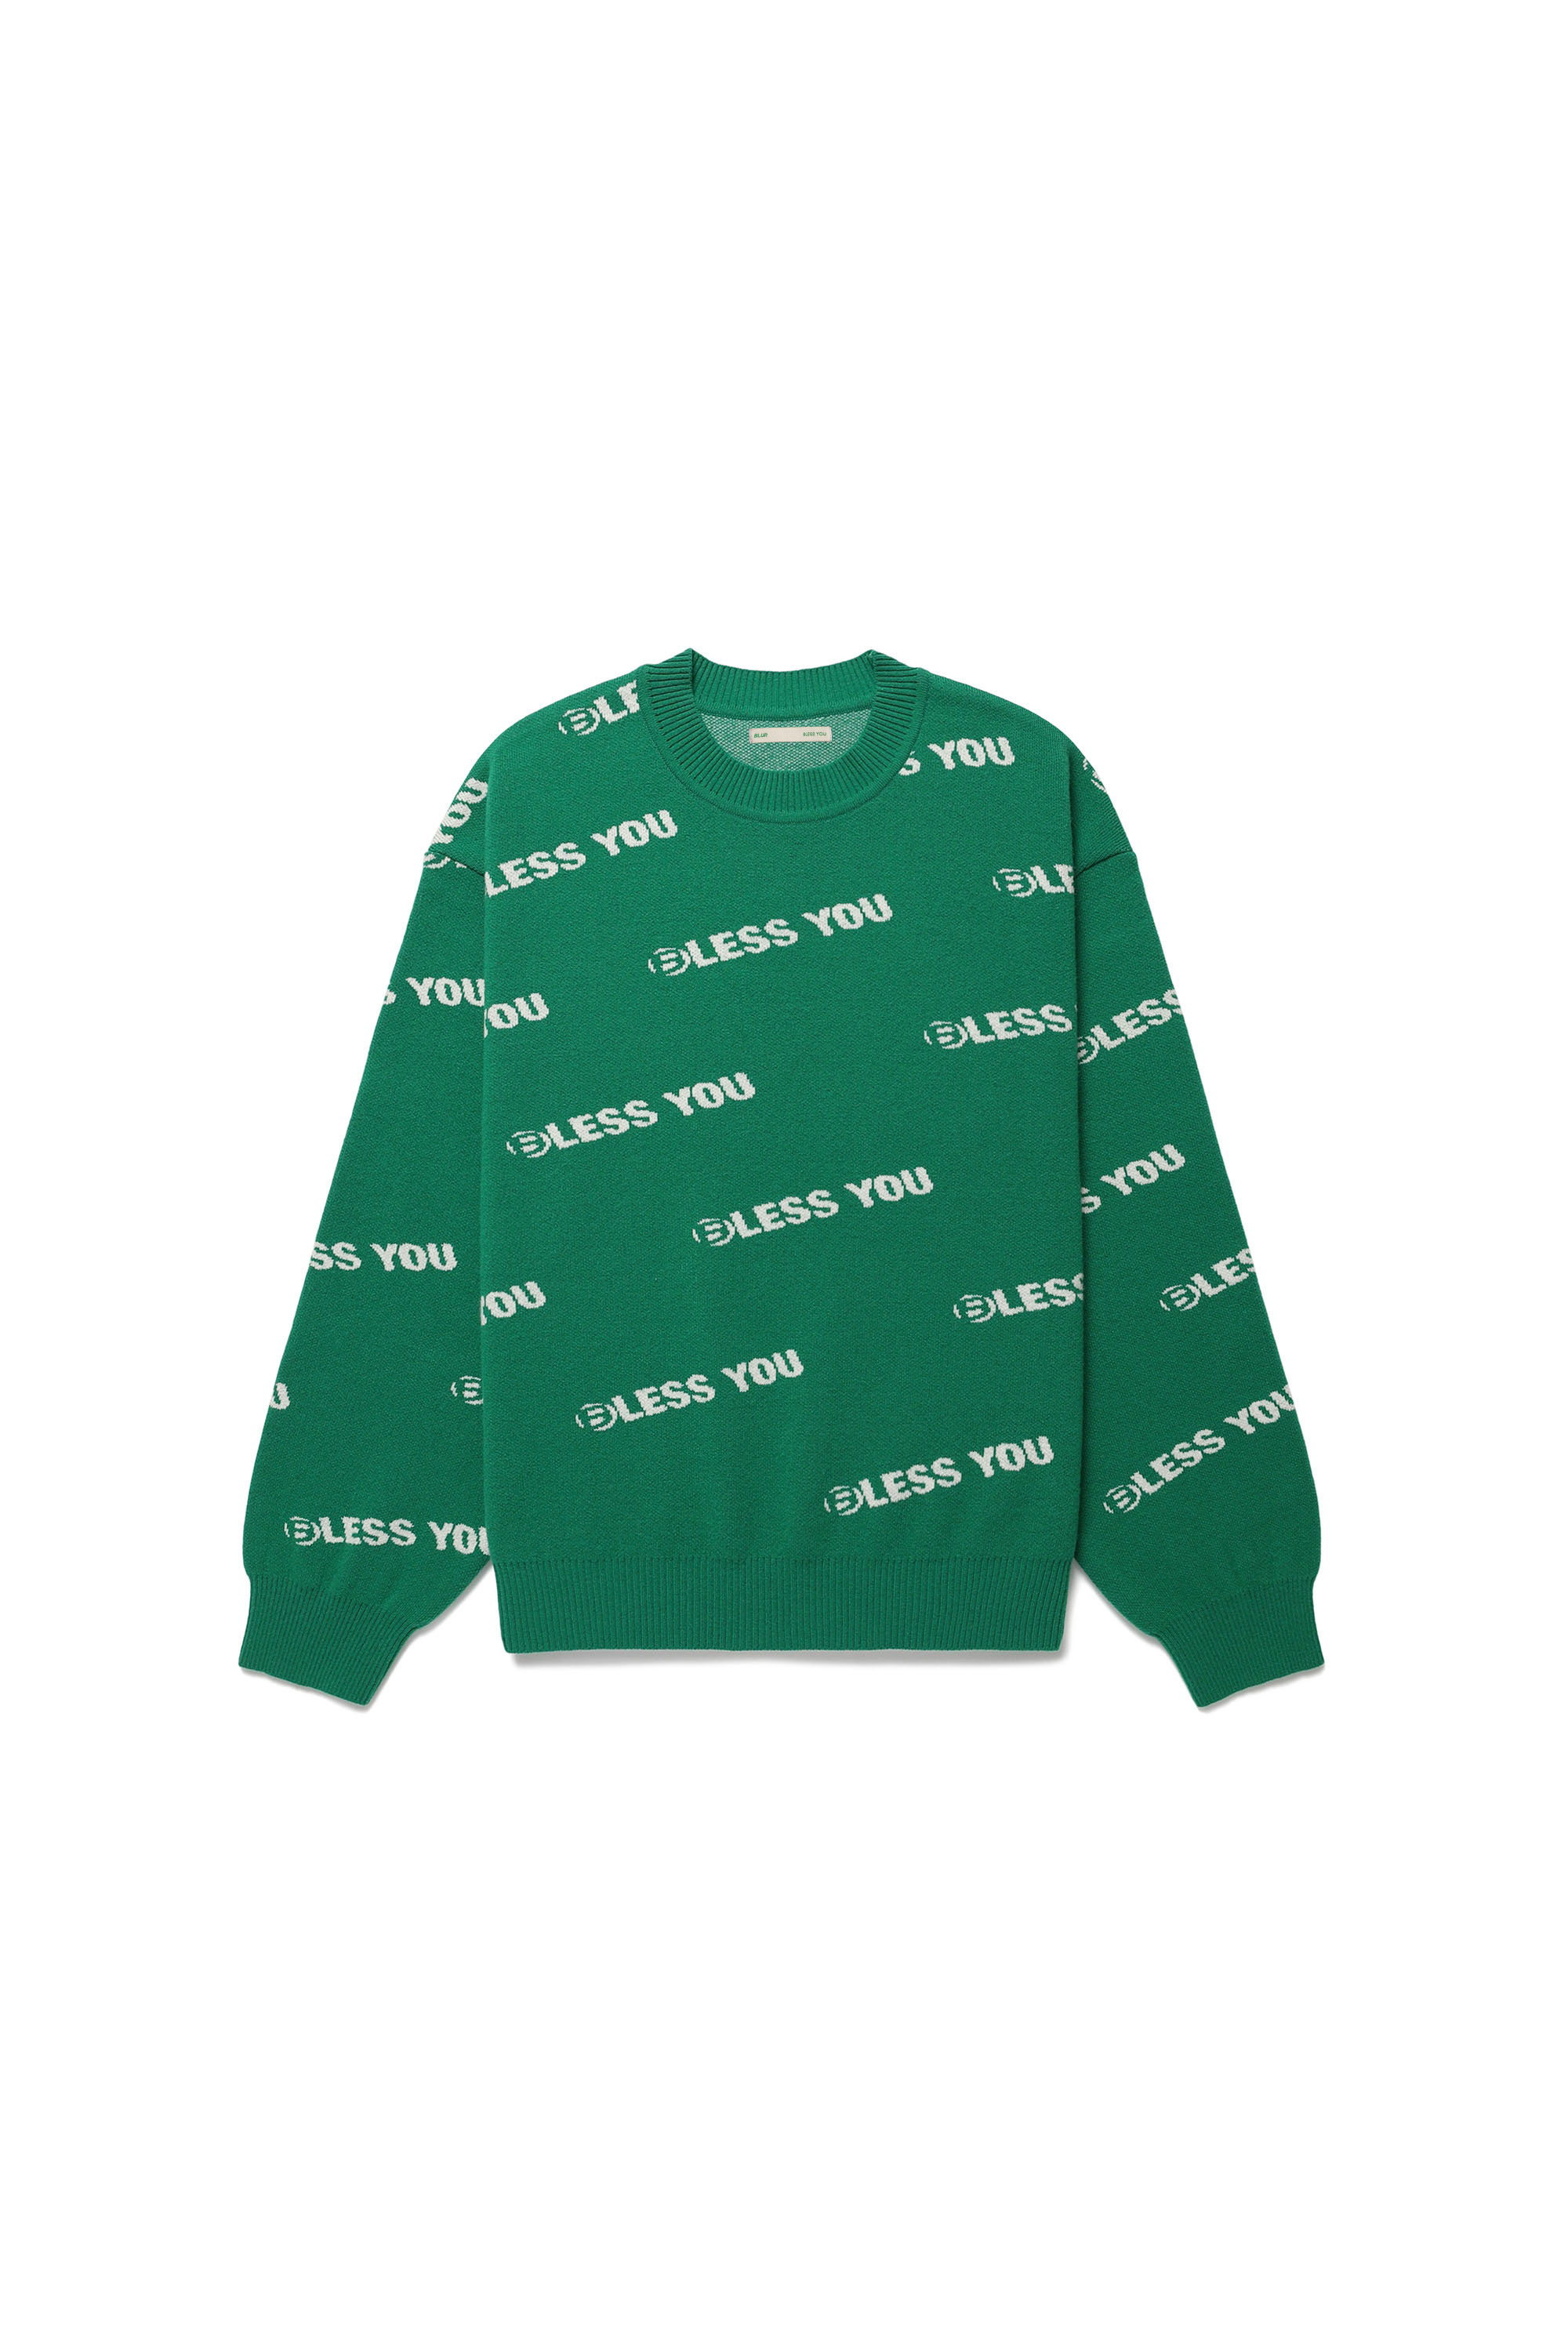 ALLOVER BLESS KNIT PULLOVER - GREEN